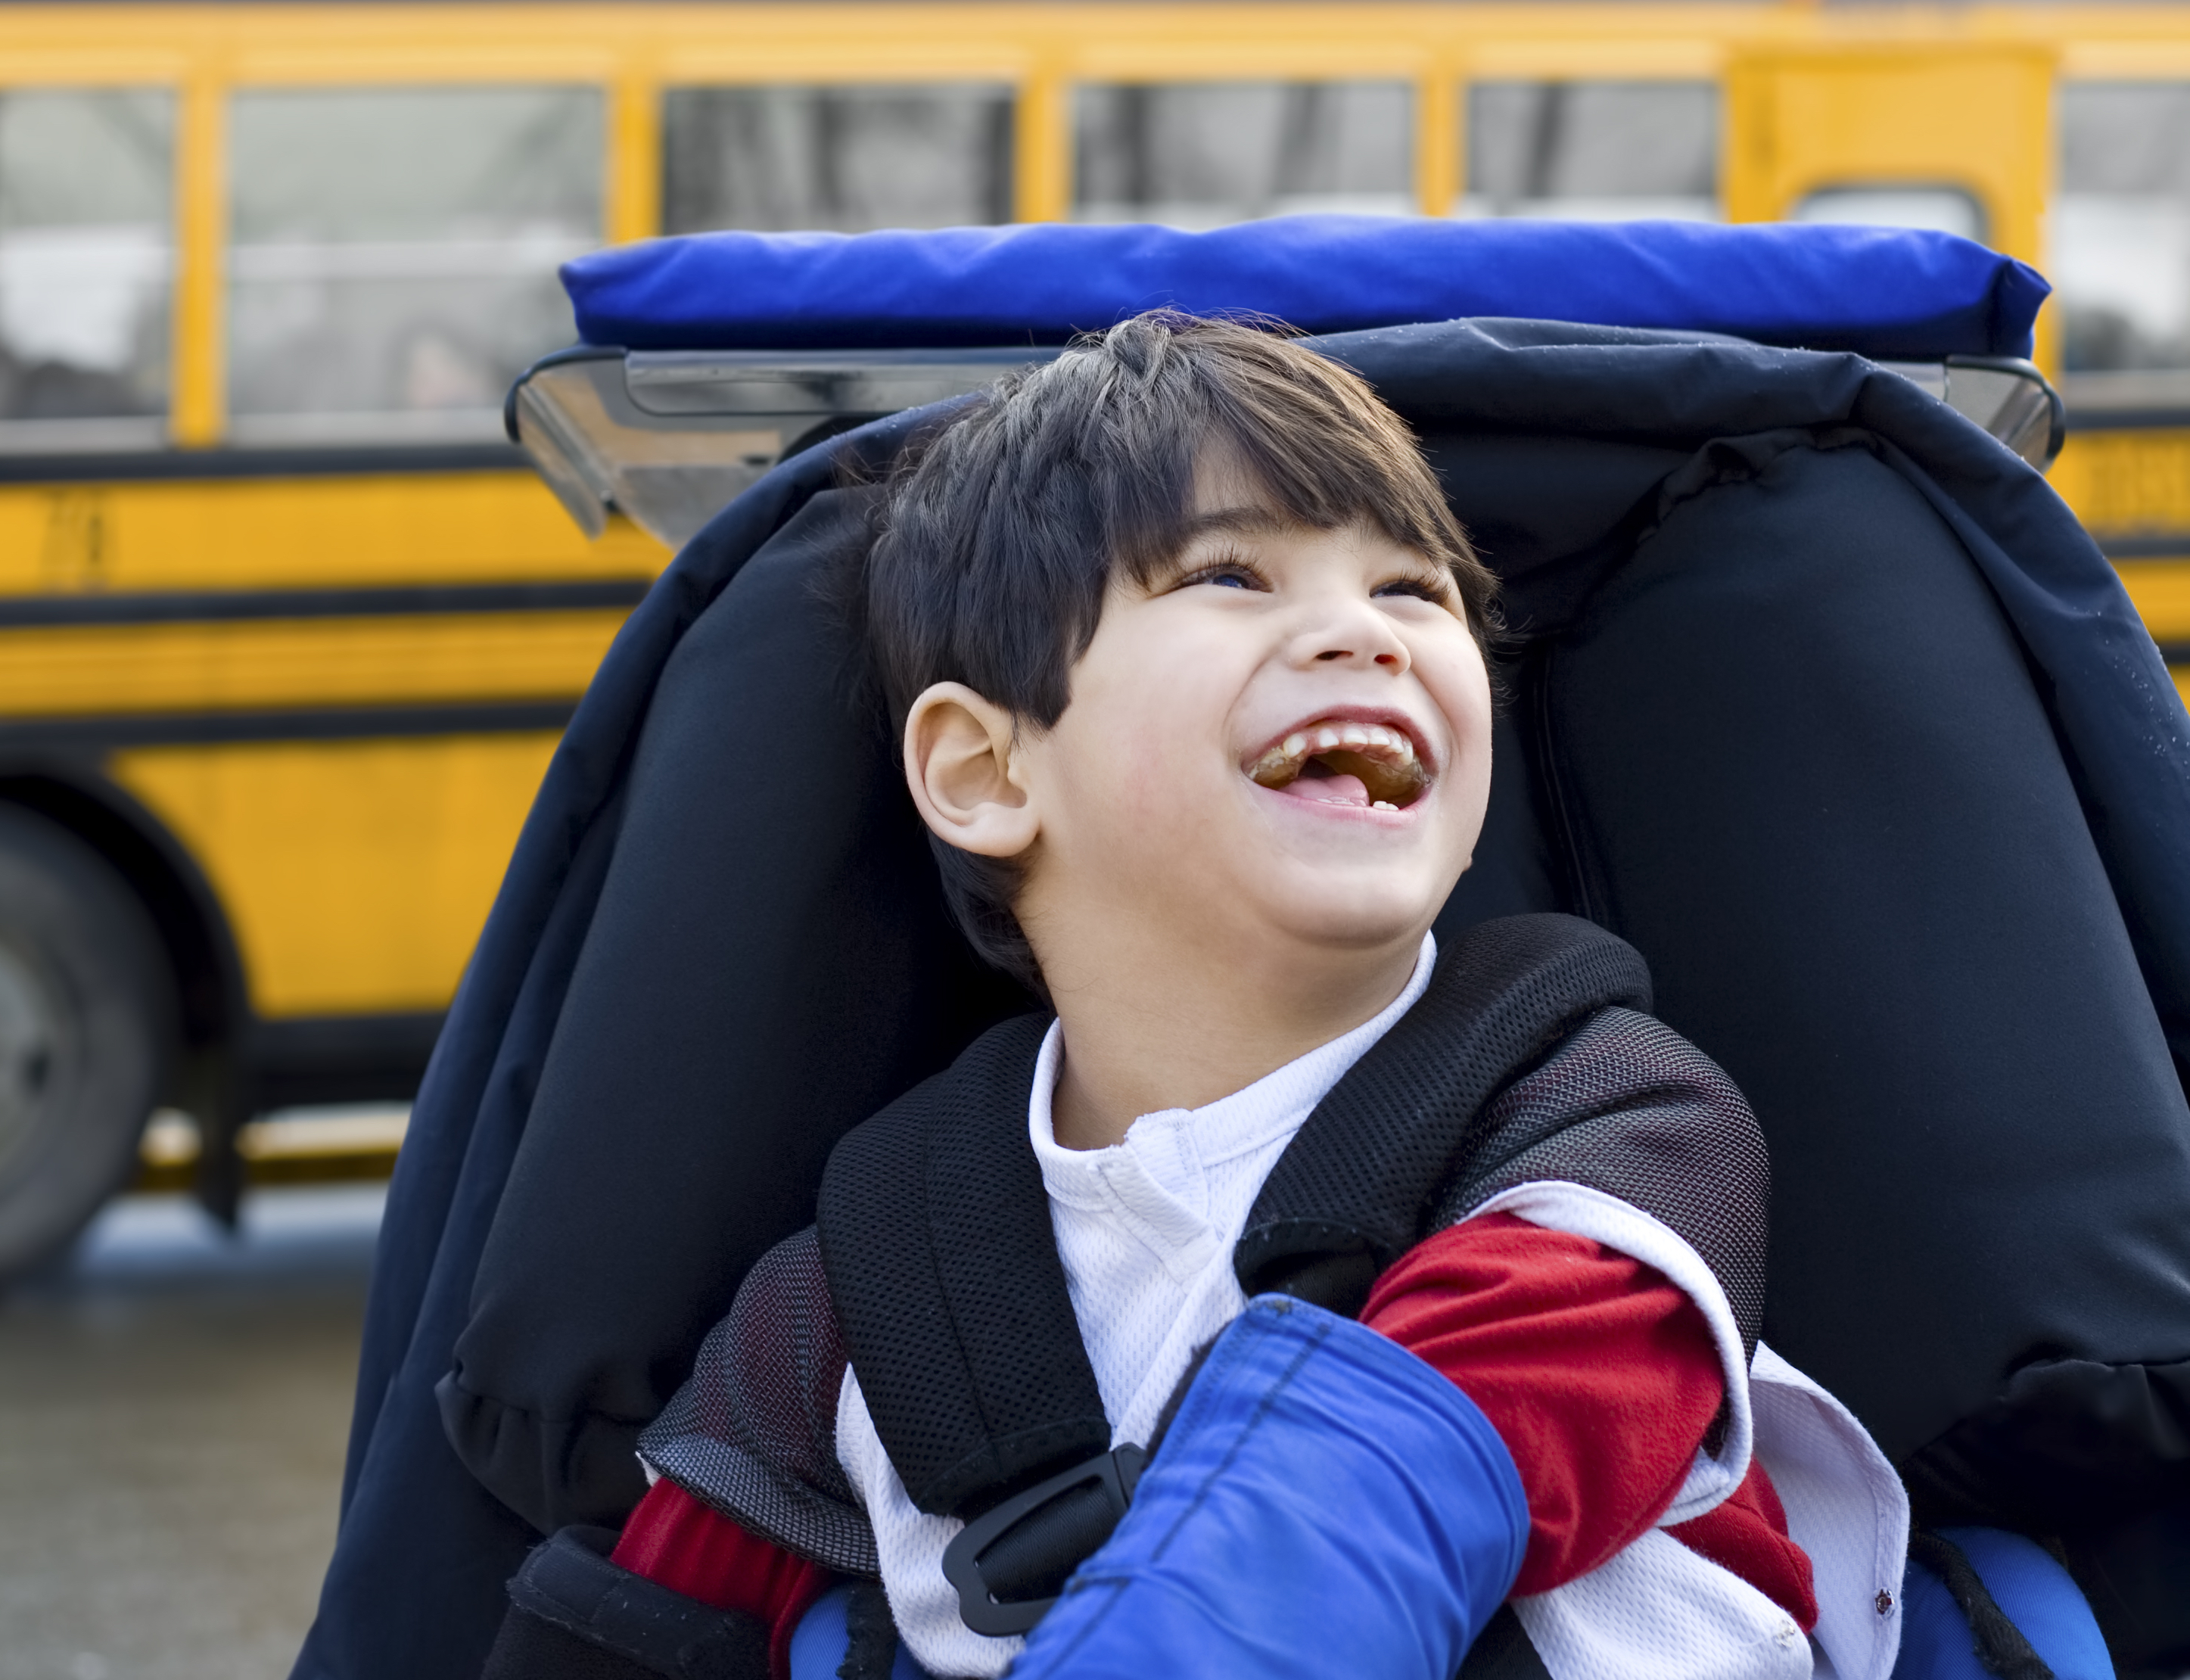 A Parent’s Guide to Researching Schools for Children With Special Needs